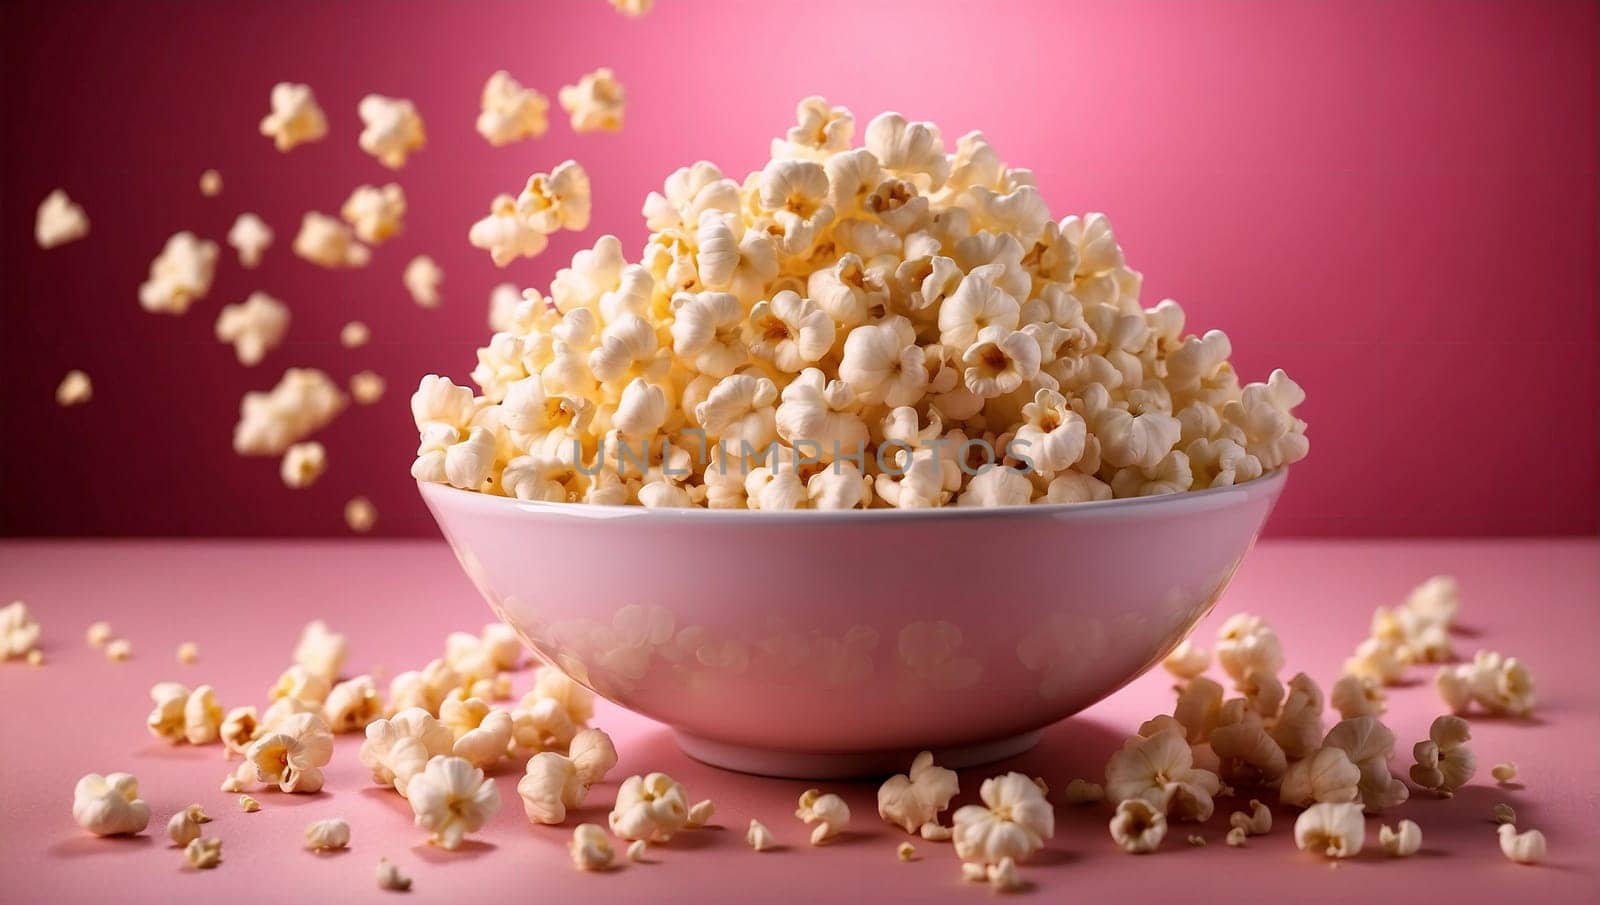 Exploding popcorn in a glass bowl on a bright pink background